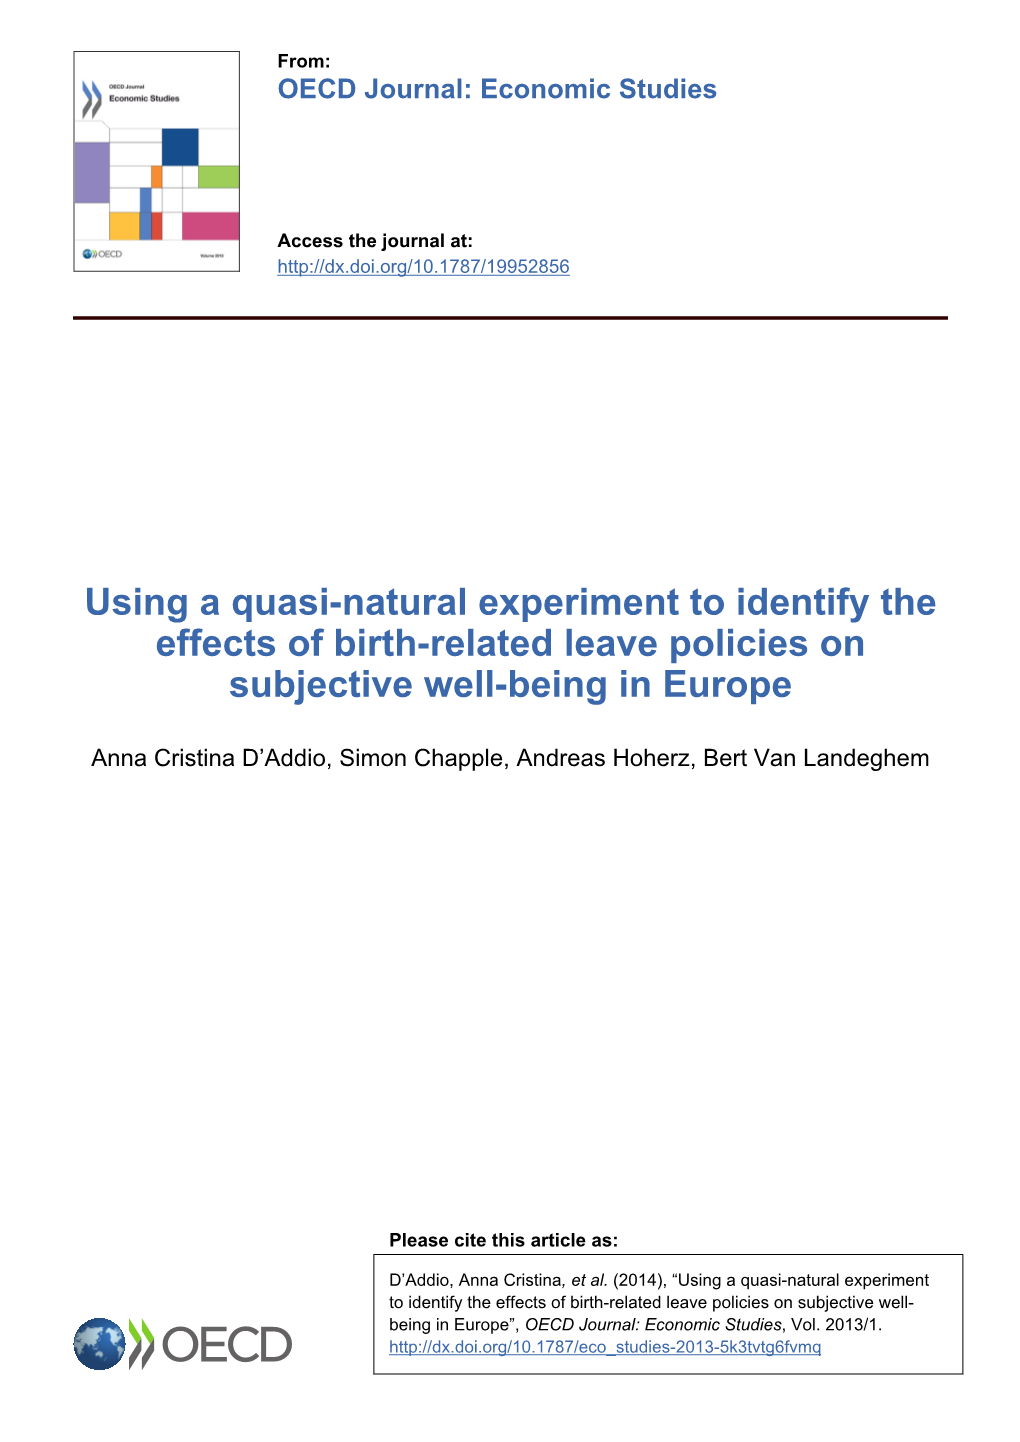 Using a Quasi-Natural Experiment to Identify the Effects of Birth-Related Leave Policies on Subjective Well-Being in Europe